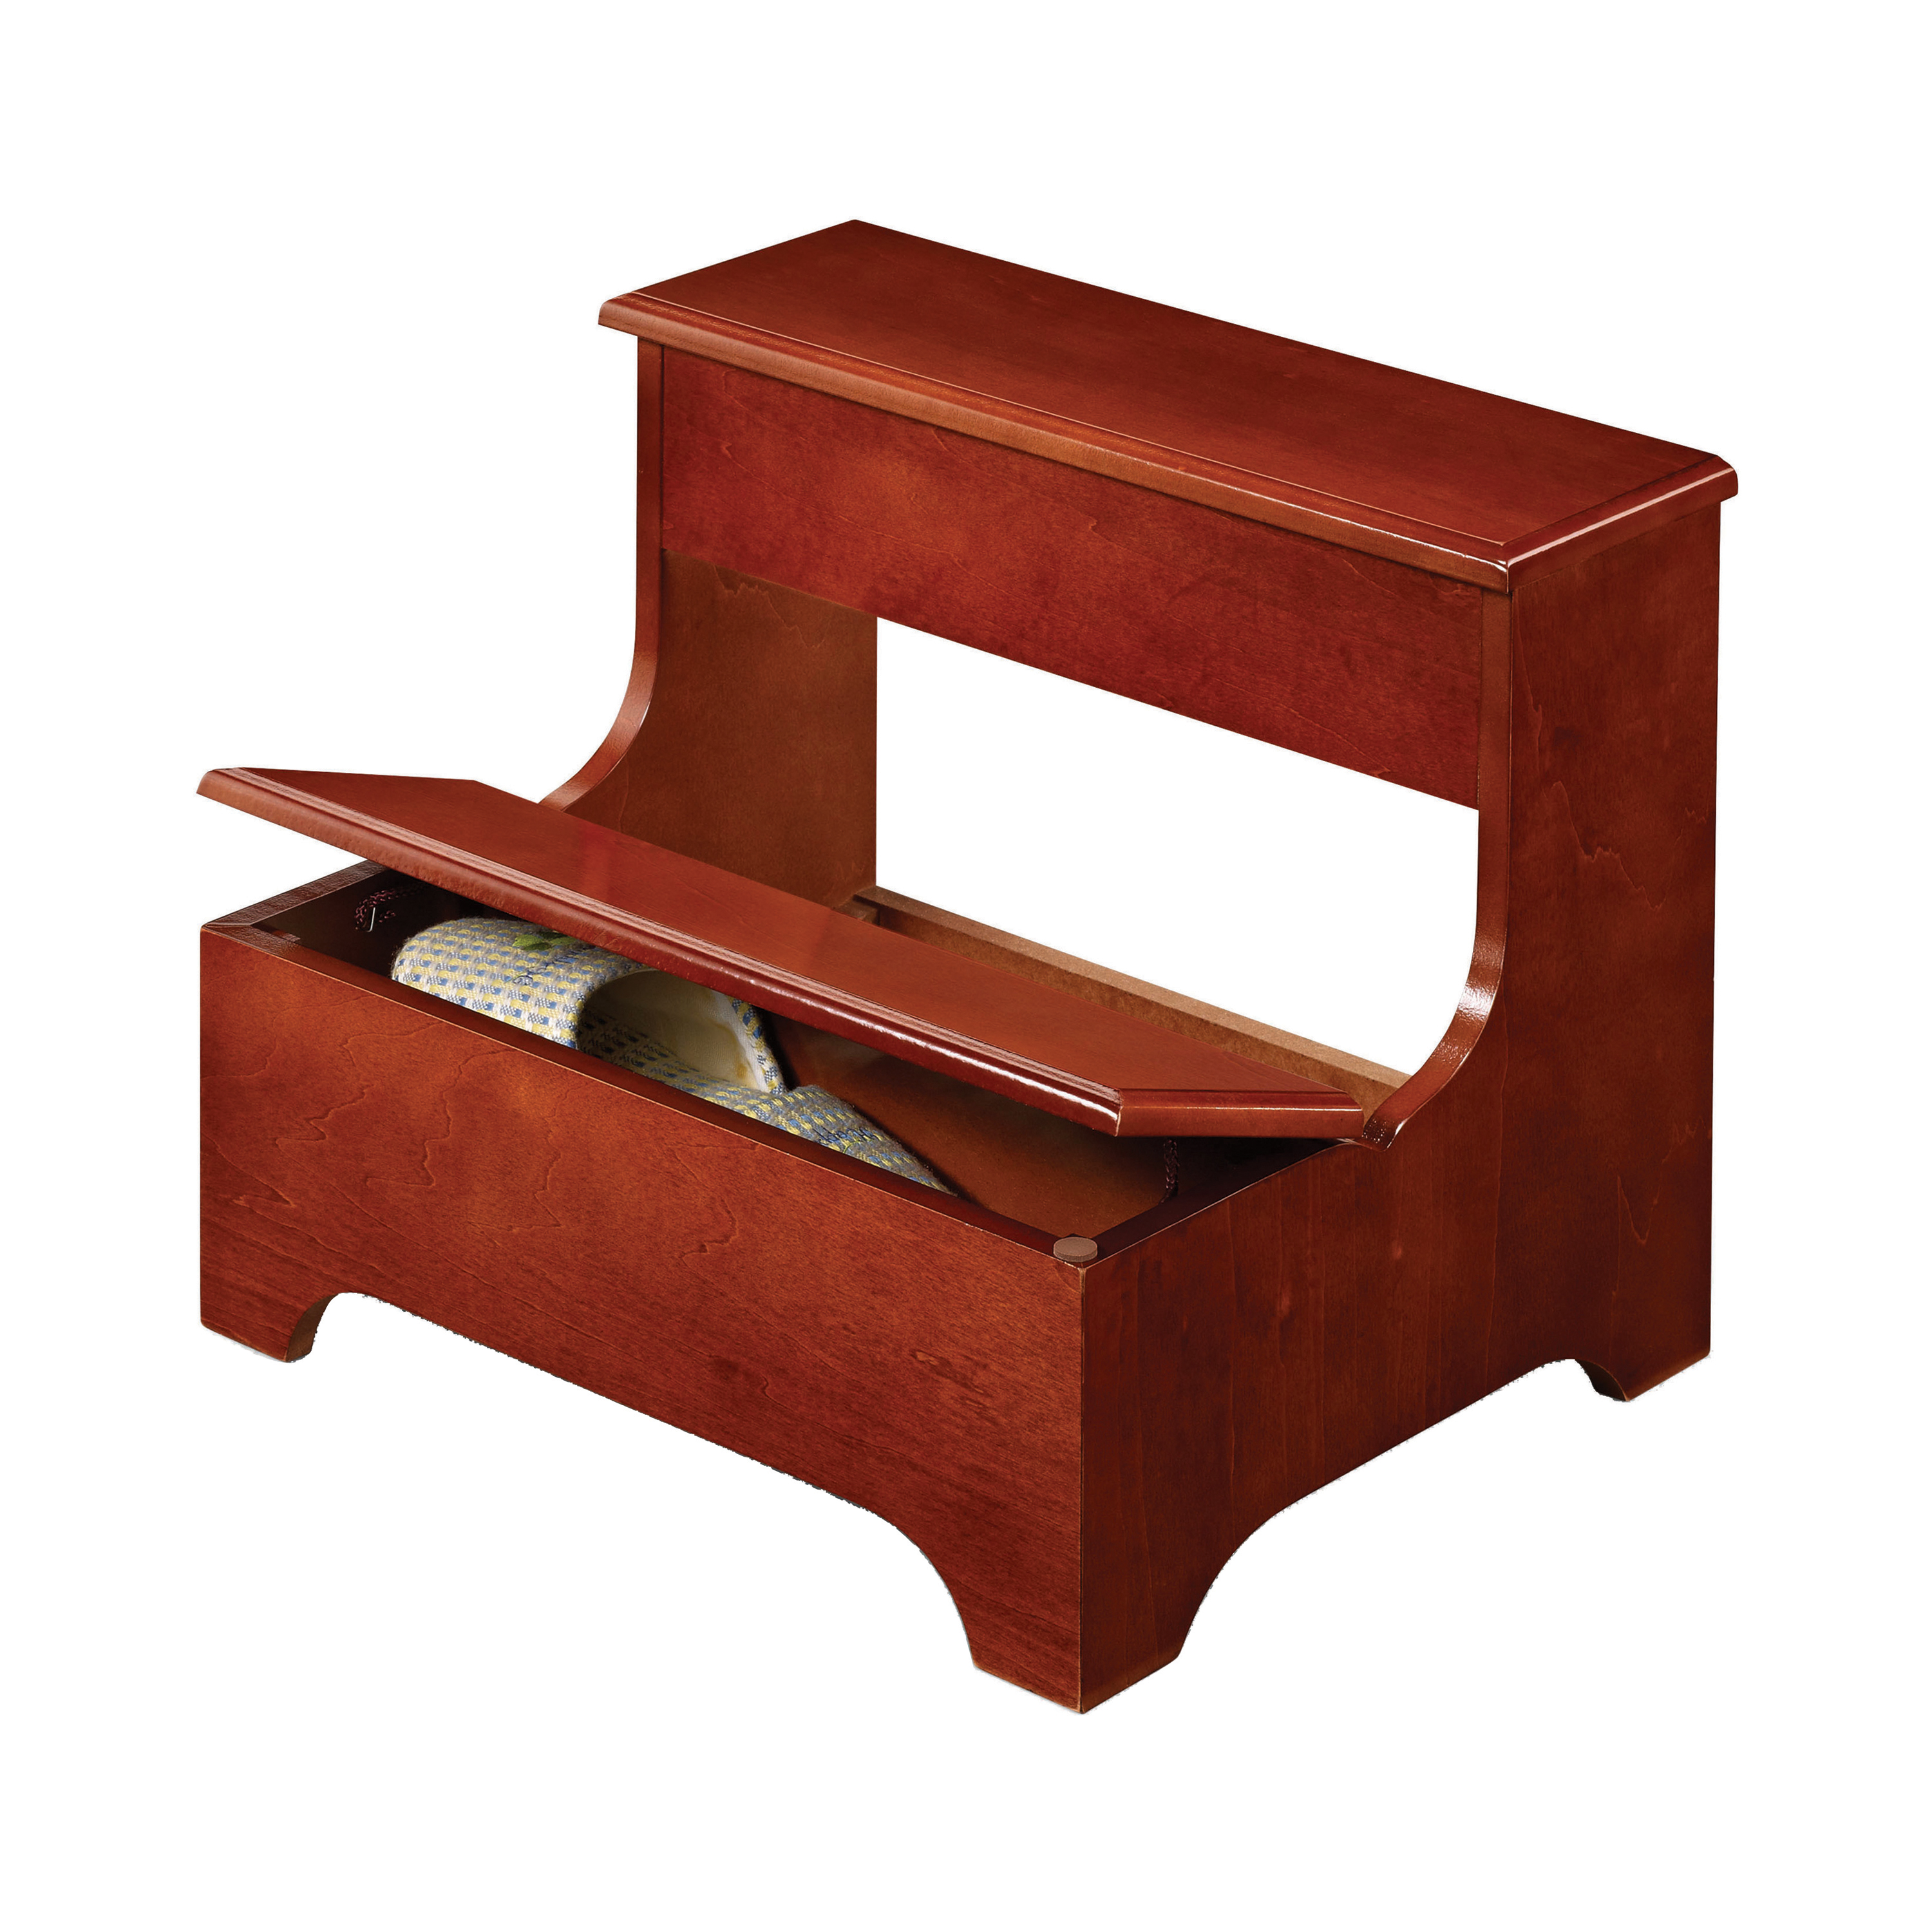 2-tier Step Stool With Hidden Storage Warm Brown - image 2 of 3